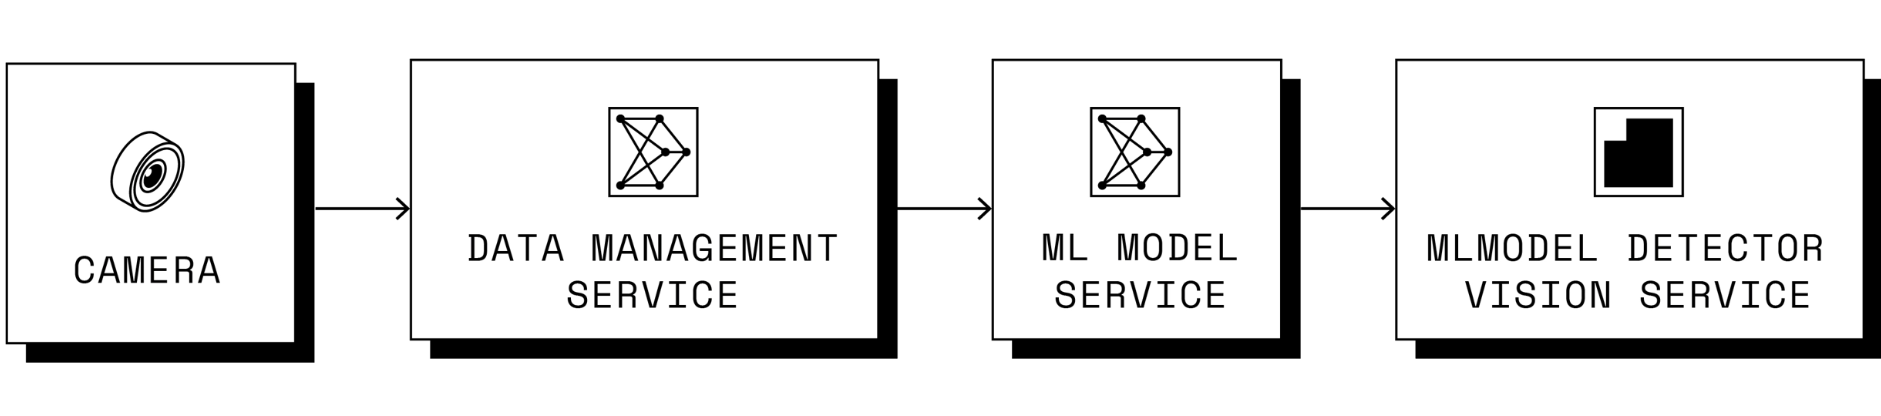 Diagram of the camera component to data management service to ML model service to vision service pipeline.